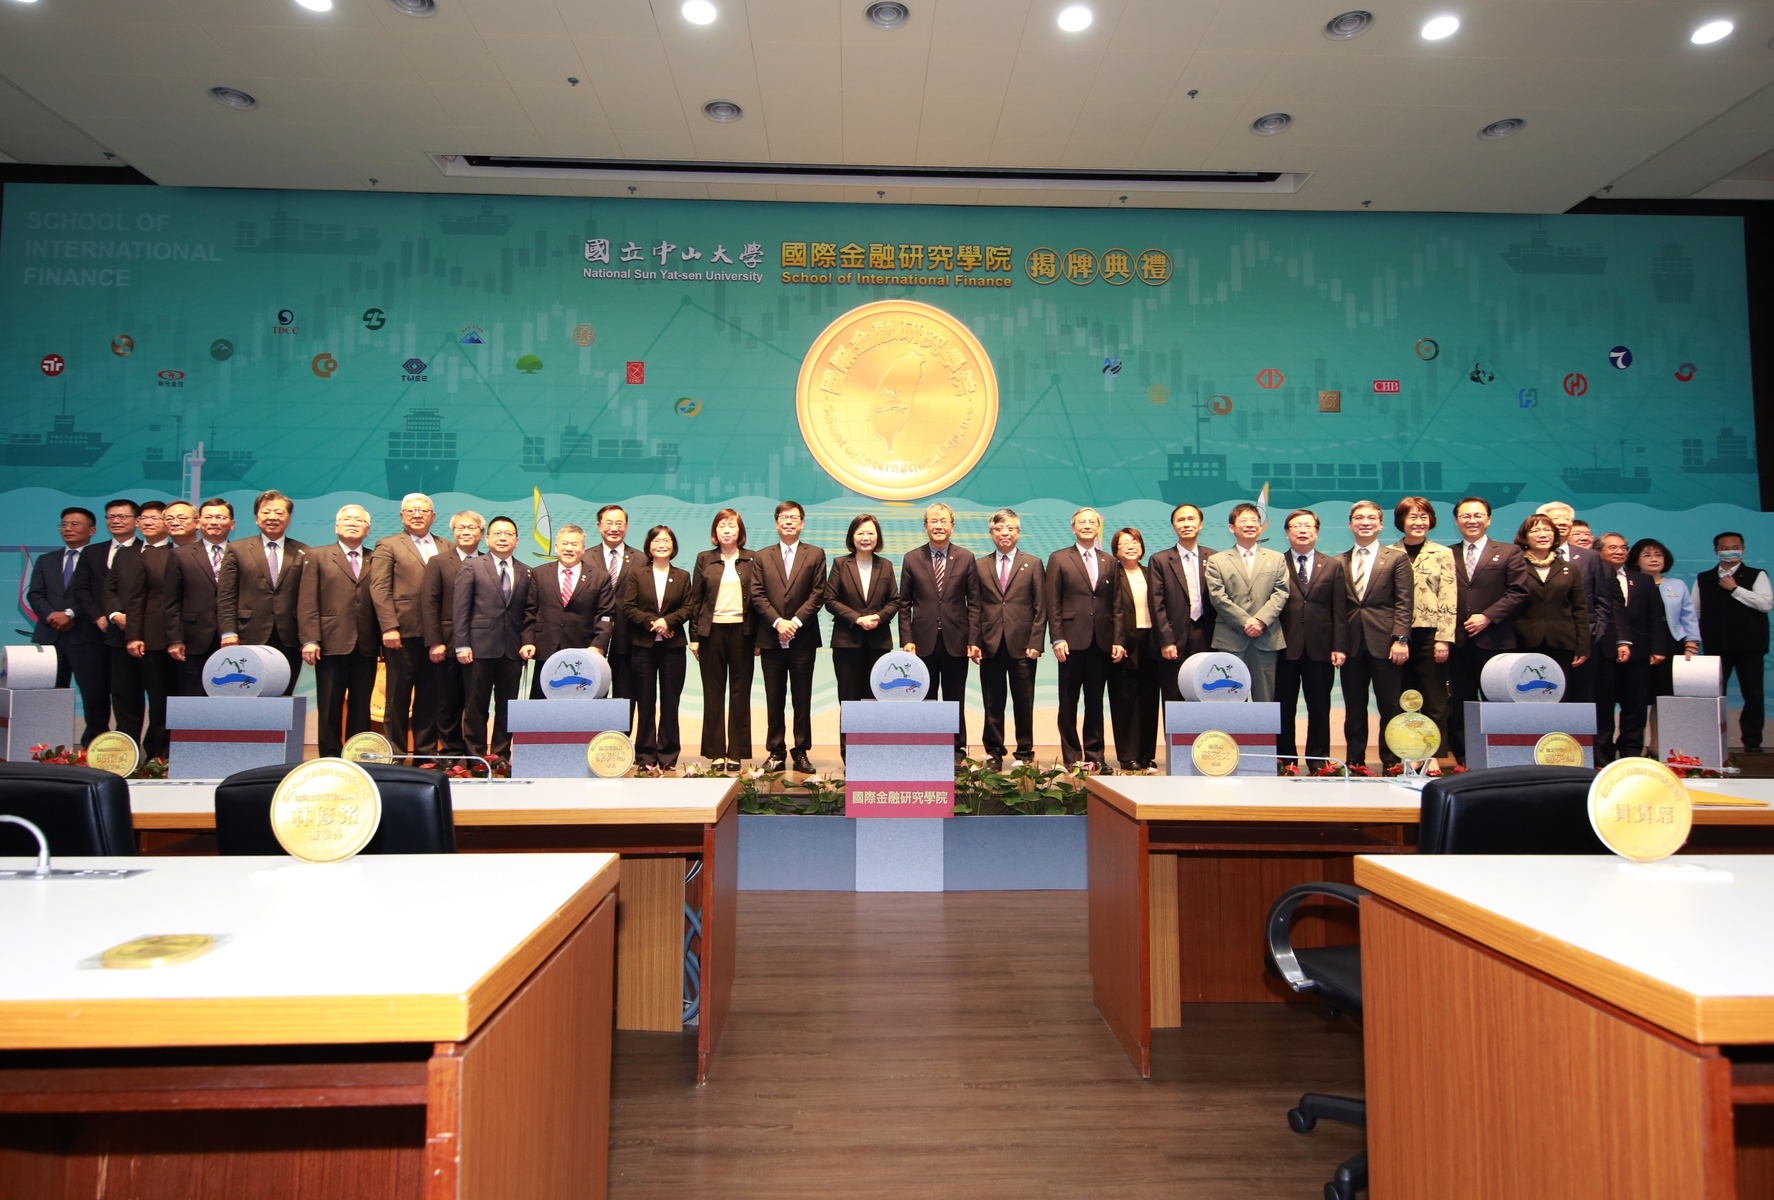 Inauguration ceremony of the School of International Finance. The stage design imitates the features of Sizihwan Bay including its beautiful sunsets, and incorporates gold coins as a decorative element, symbolizing the cooperation between industry, academia, and government in forming a team of finance professionals for Taiwan, establishing a new milestone.